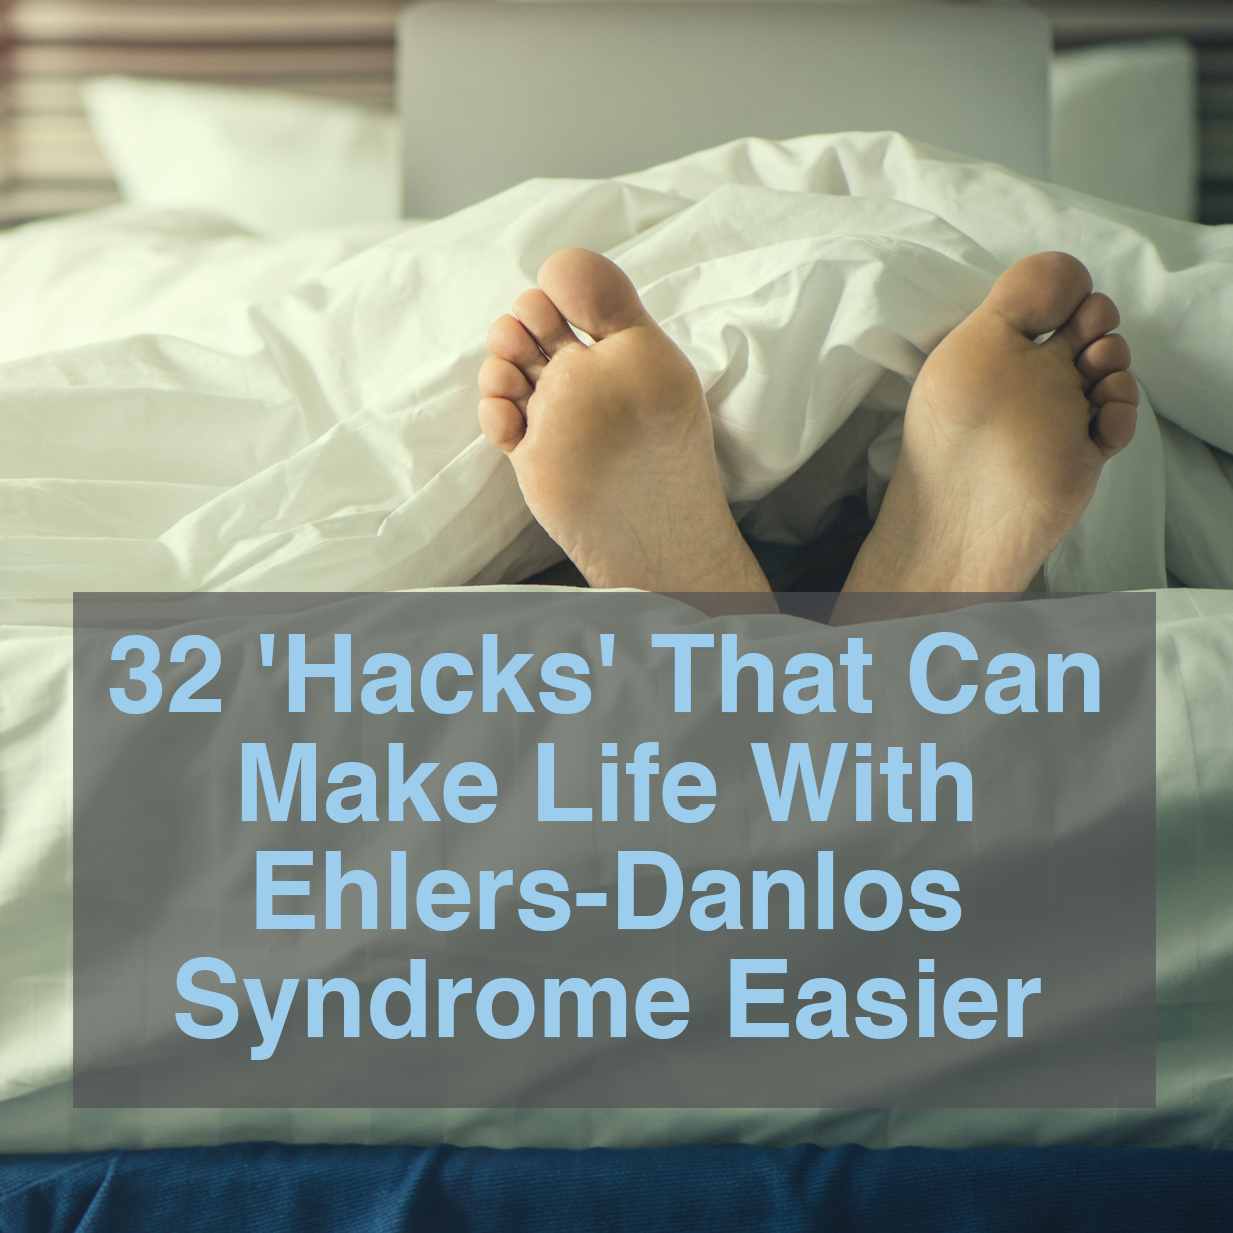 32 'hacks' that can make life with ehlers-danlos syndrome easier